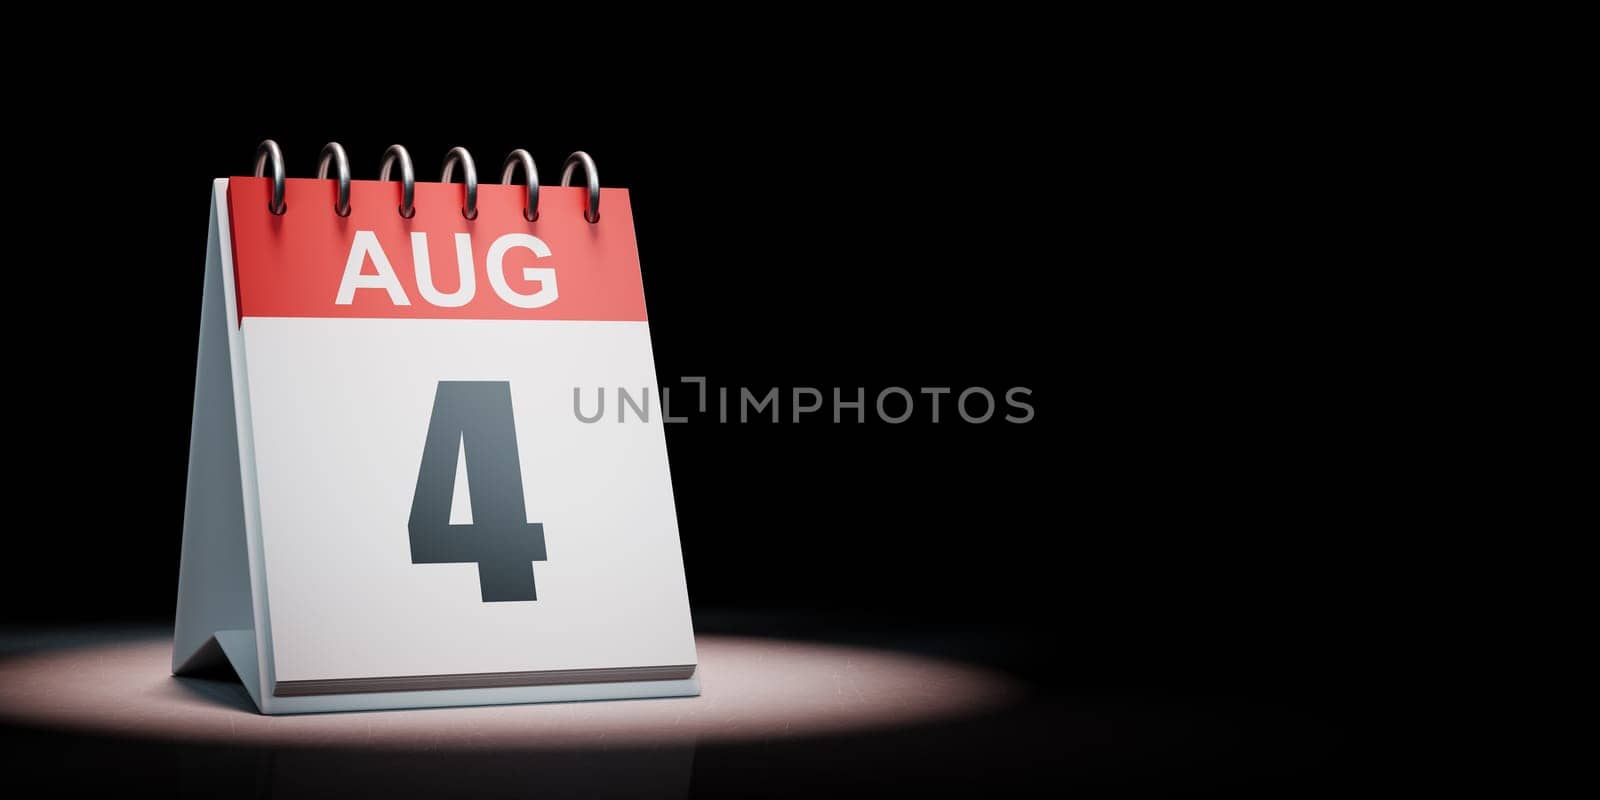 Red and White August 4 Desk Calendar Spotlighted on Black Background with Copy Space 3D Illustration